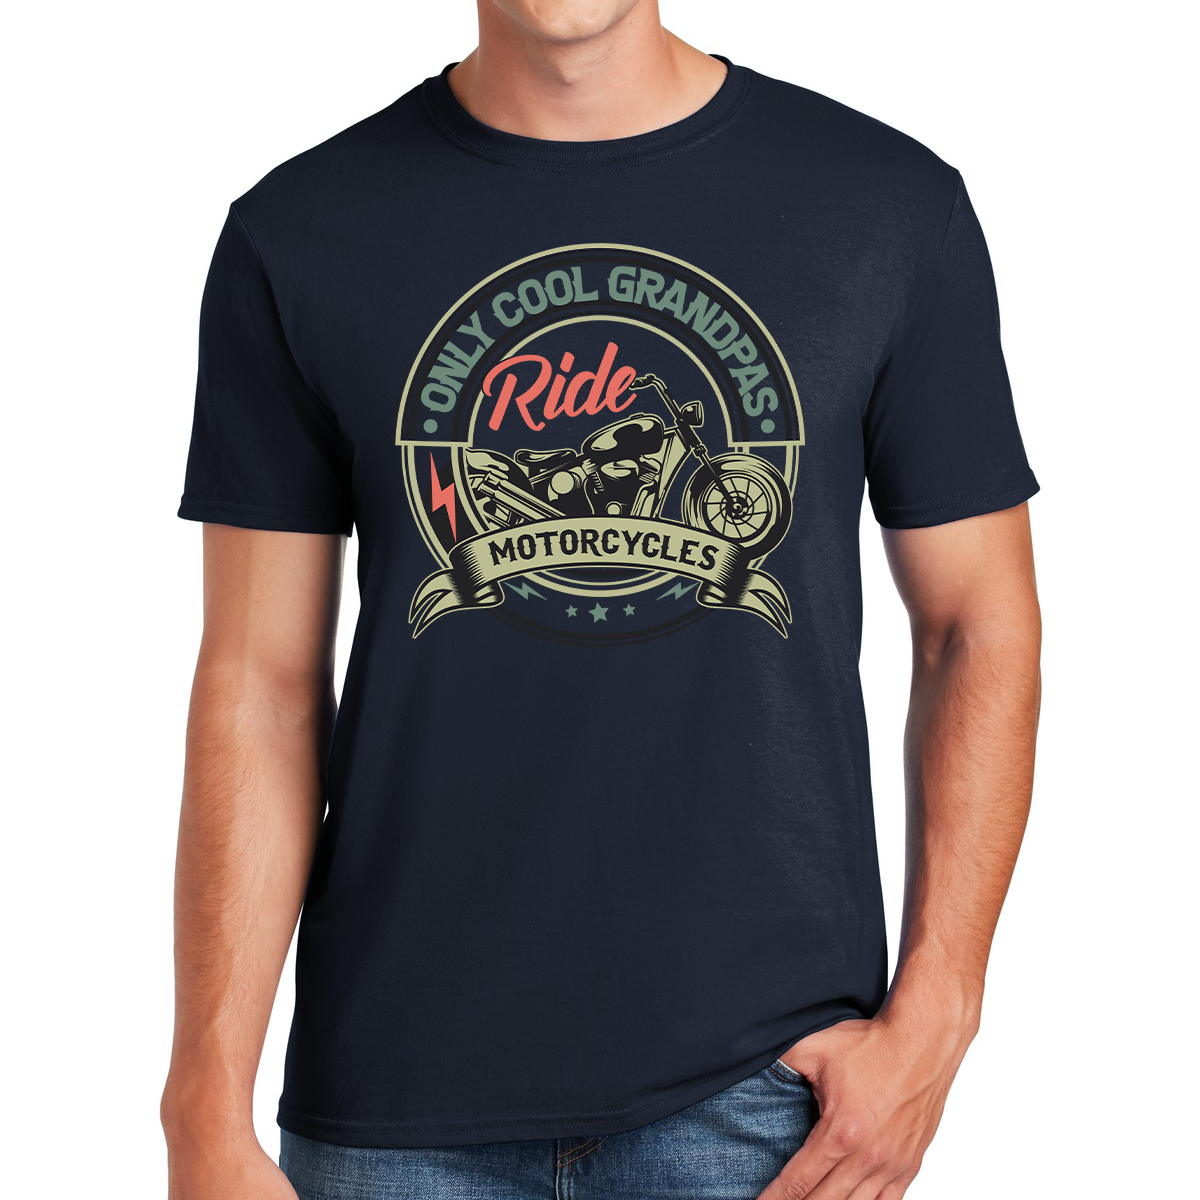 Only Cool Grandpas Ride Motorcycles Revving Up The Grandparent Game Gift For Grandpa T-shirt